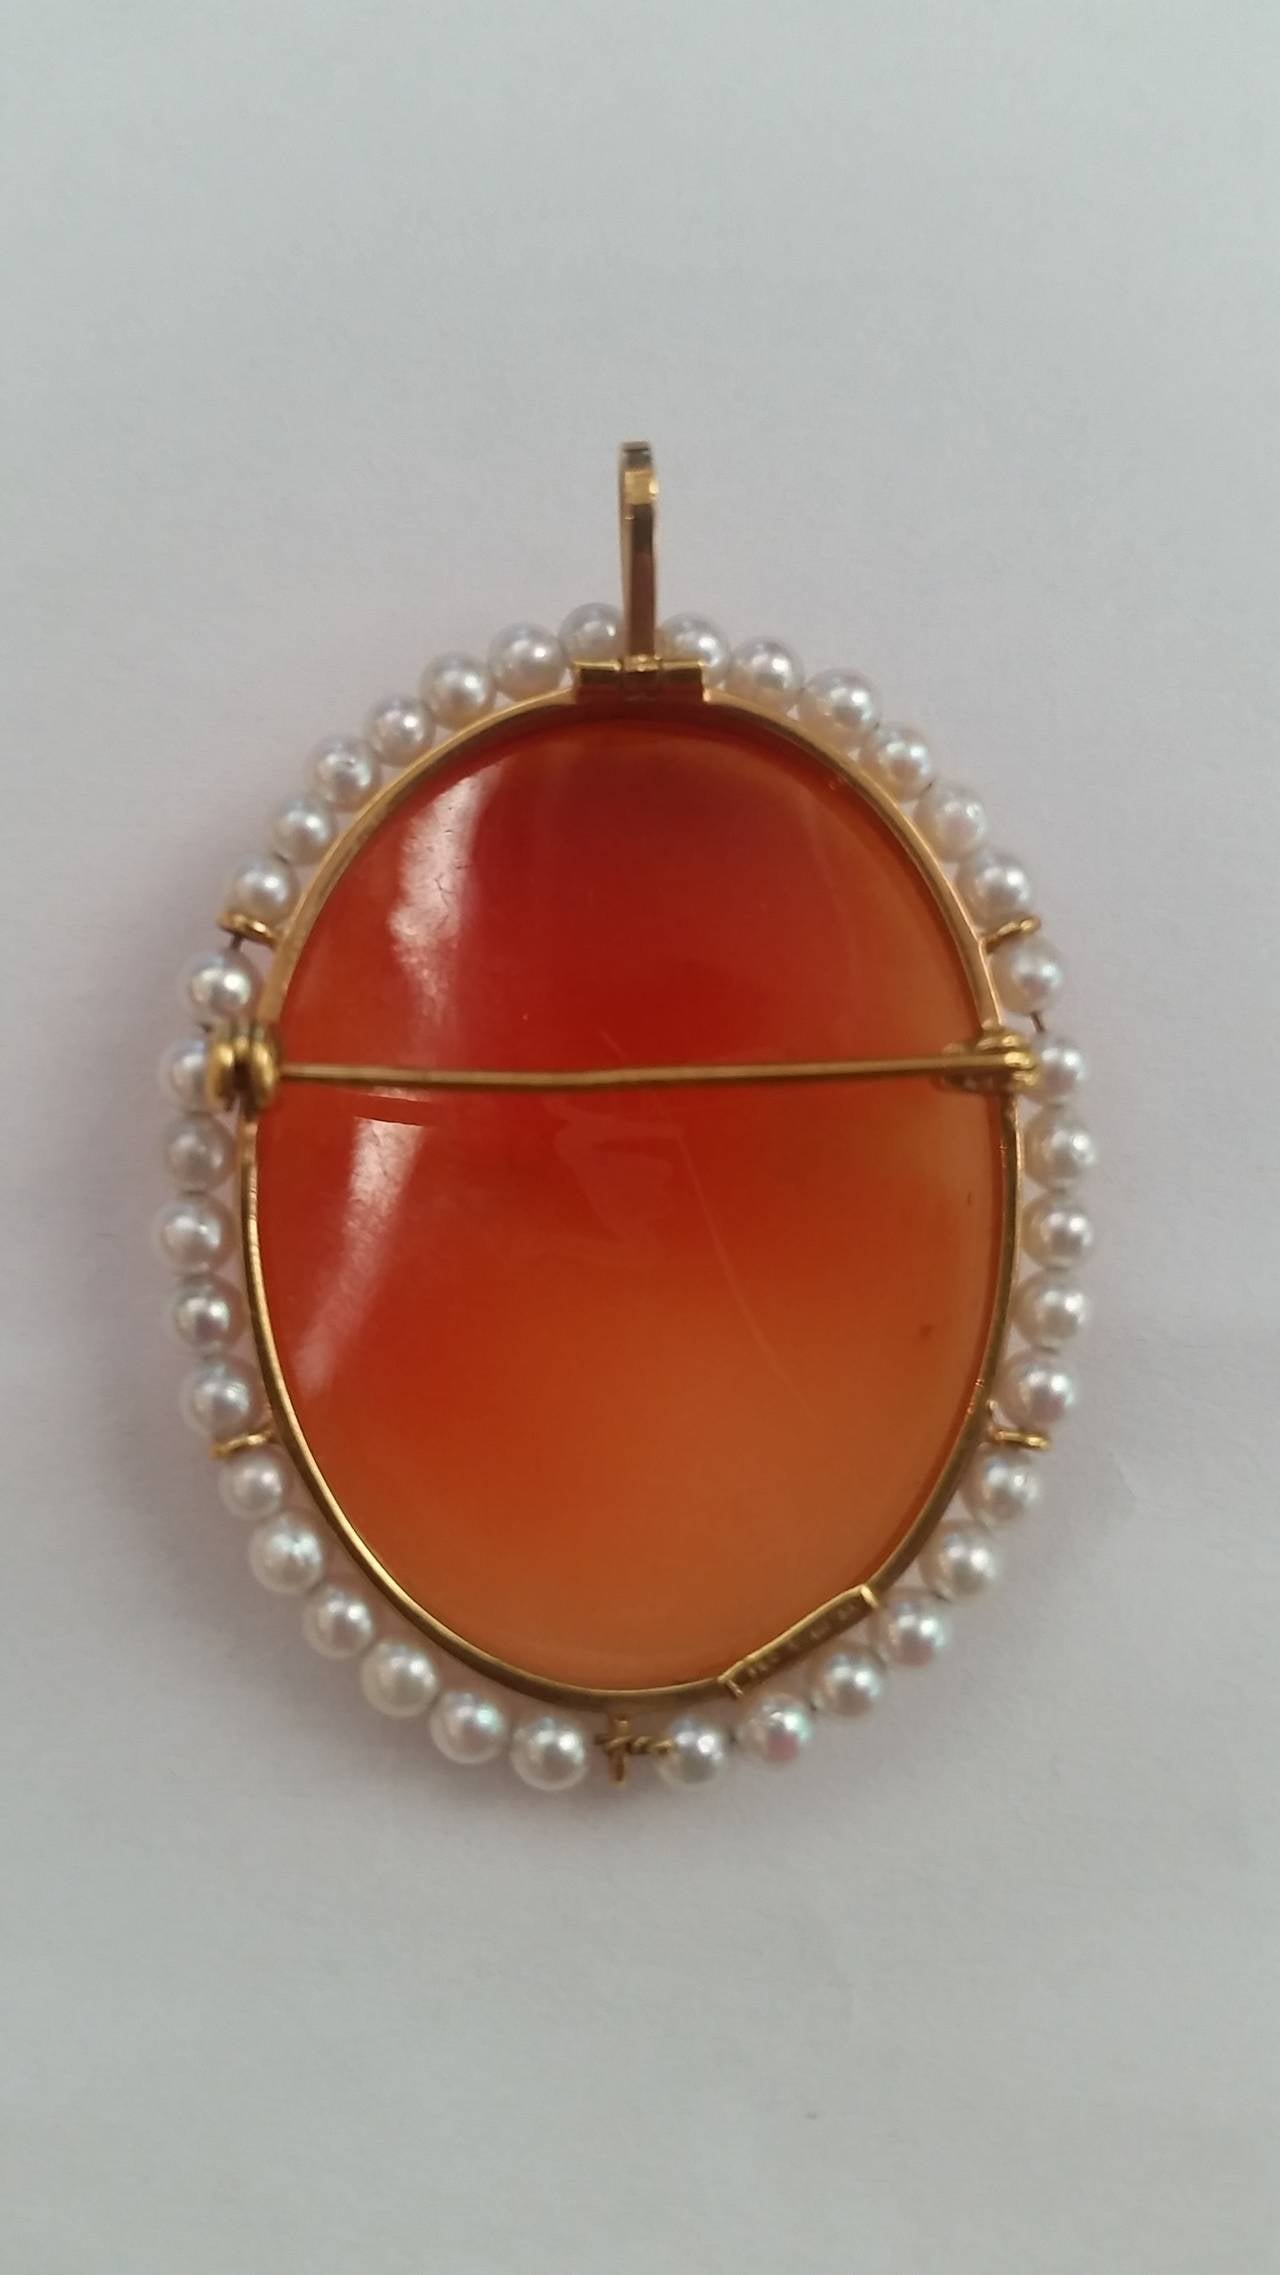 Artisan 1950s 18k gold Cammeo with white pearls brooch and pendant For Sale